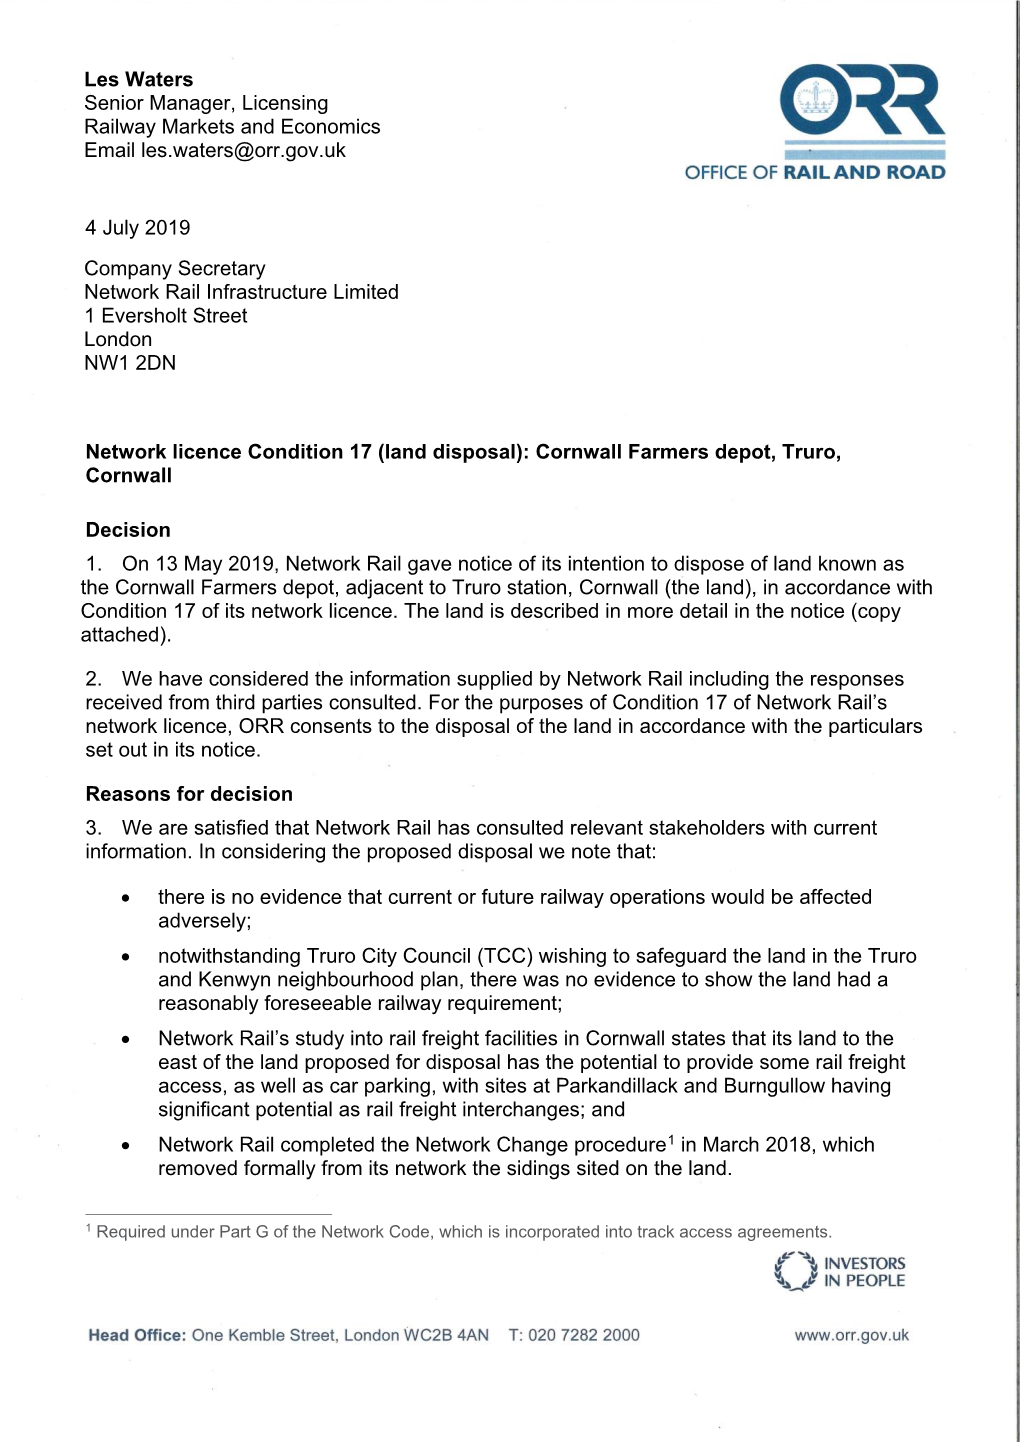 Land Disposal Cornwall Farmers Depot Dicision Letter